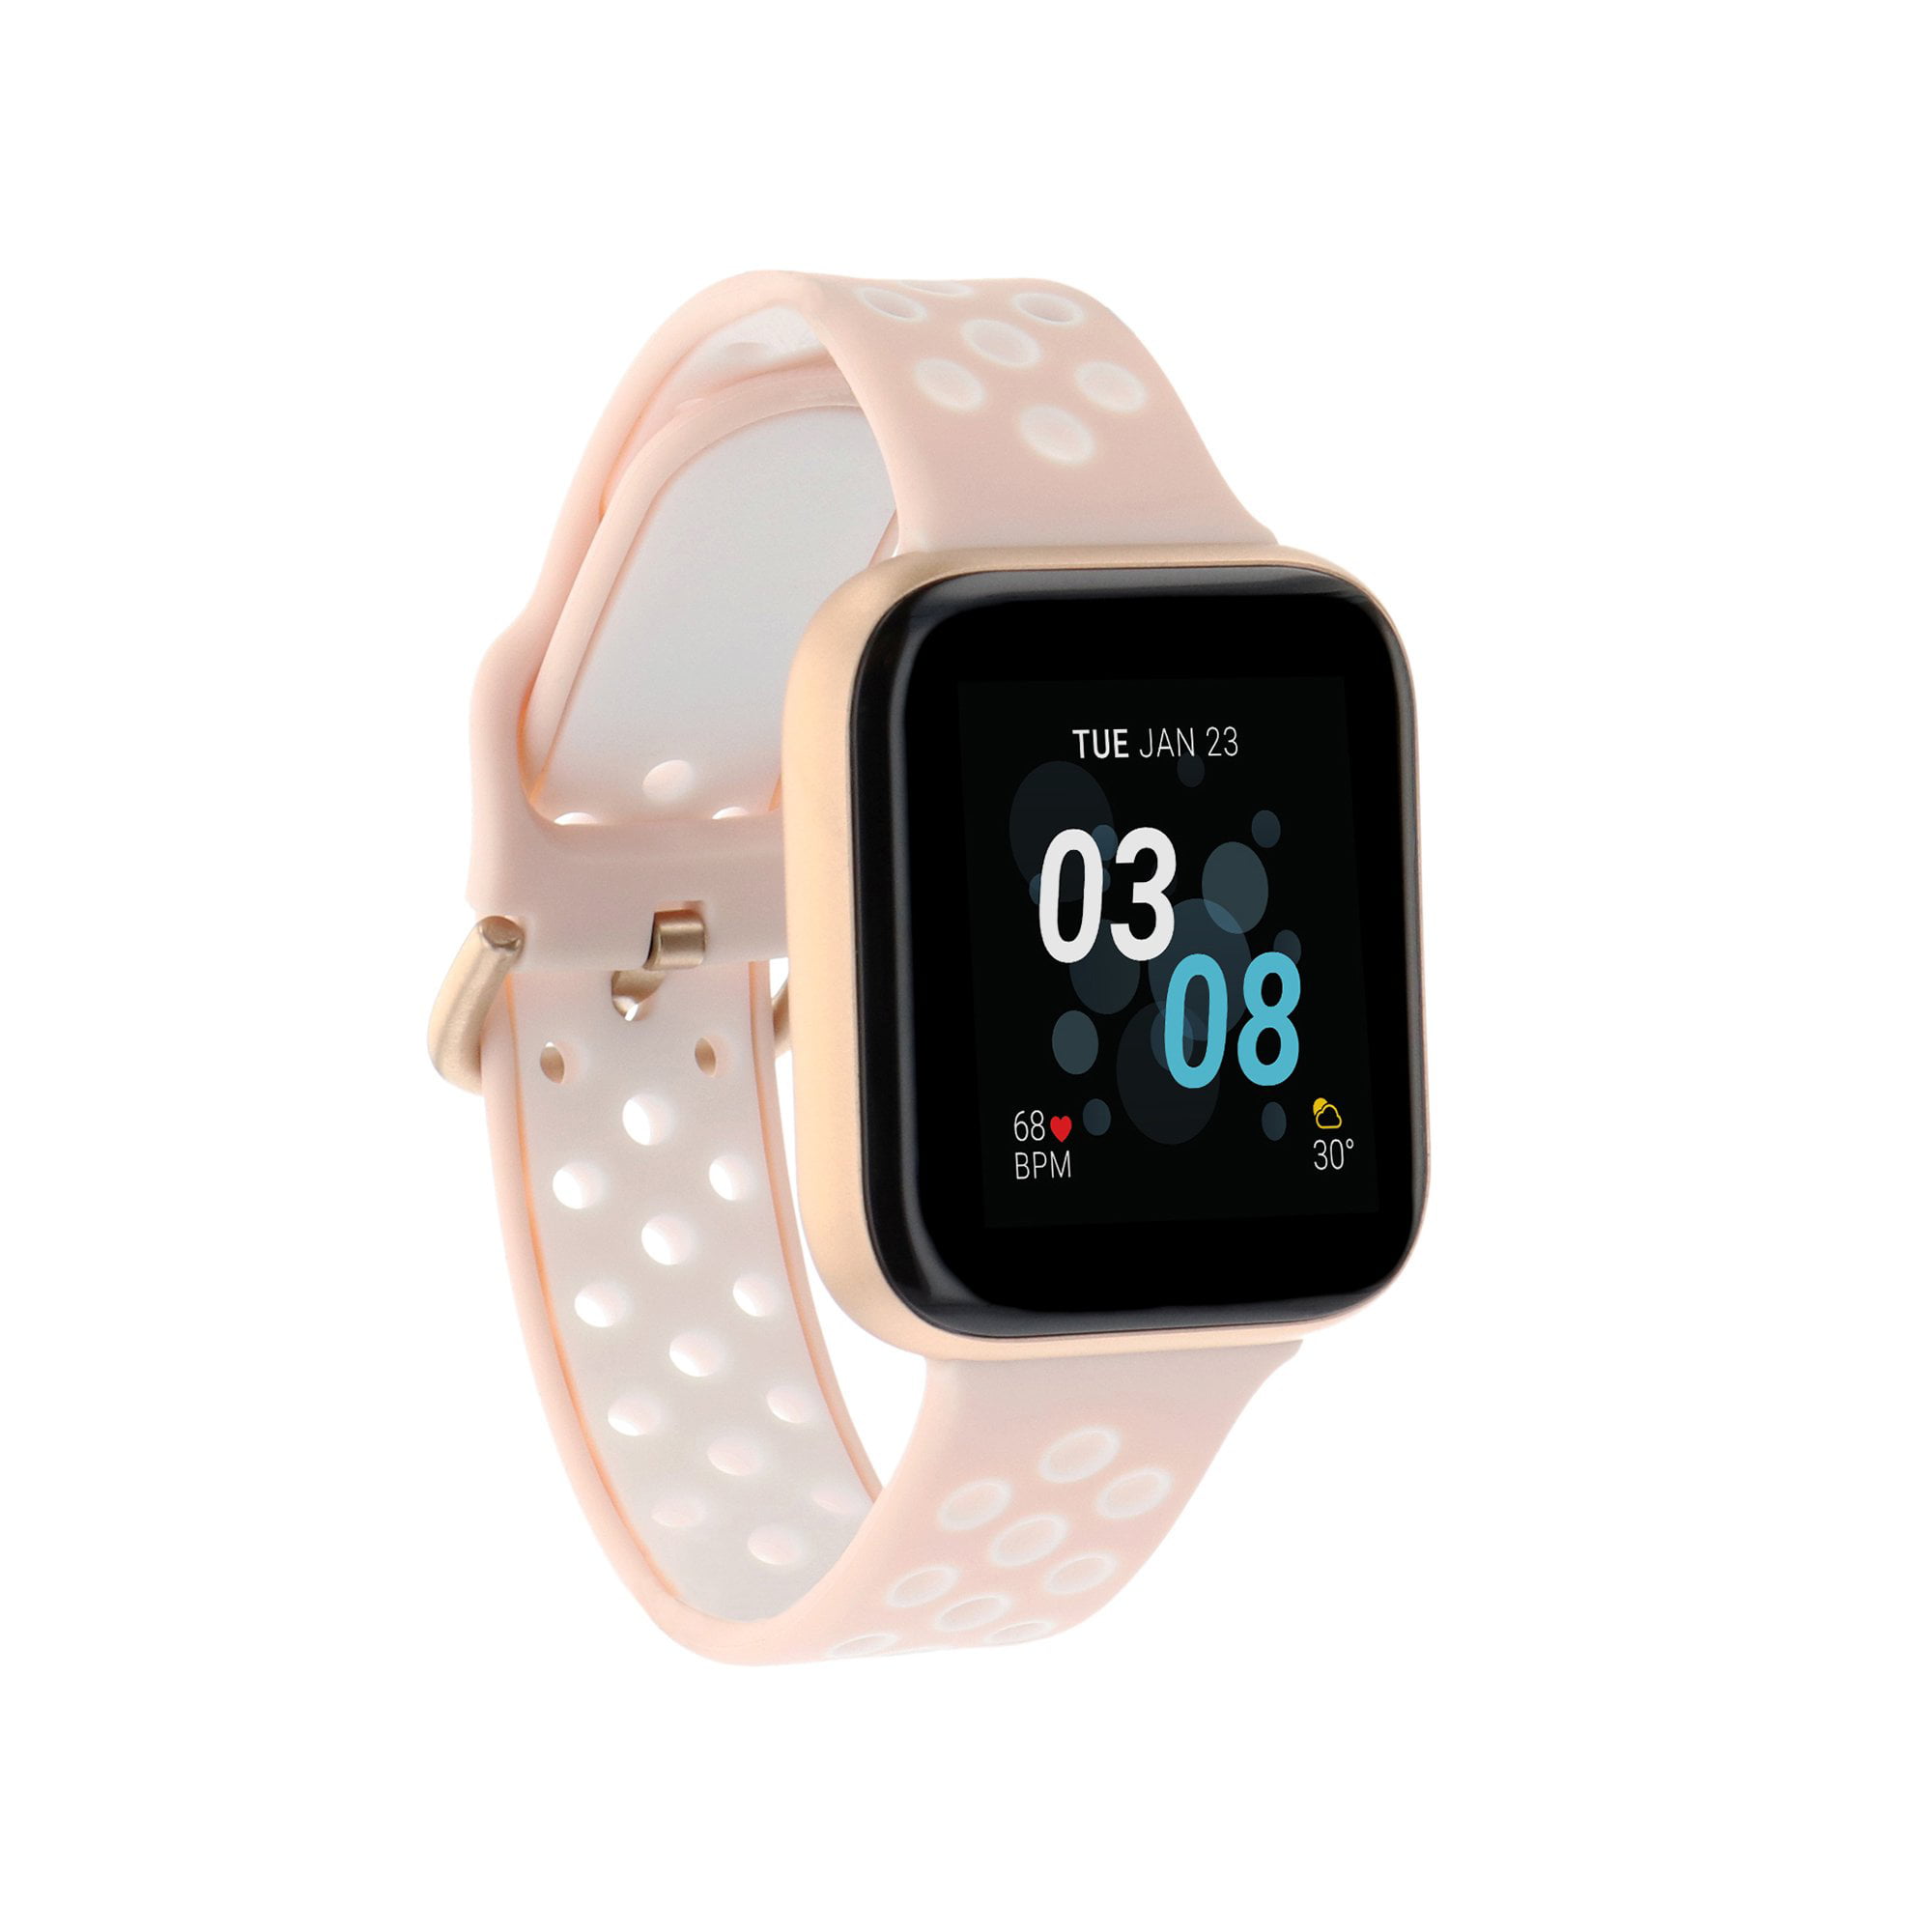 Compatible with iPhone and Android Heart Rate 40mm Sleep Monitor Message iTouch Air 3 Smartwatch Fitness Tracker Step Counter IP68 Swimming Waterproof for Women and Men Touch Screen 